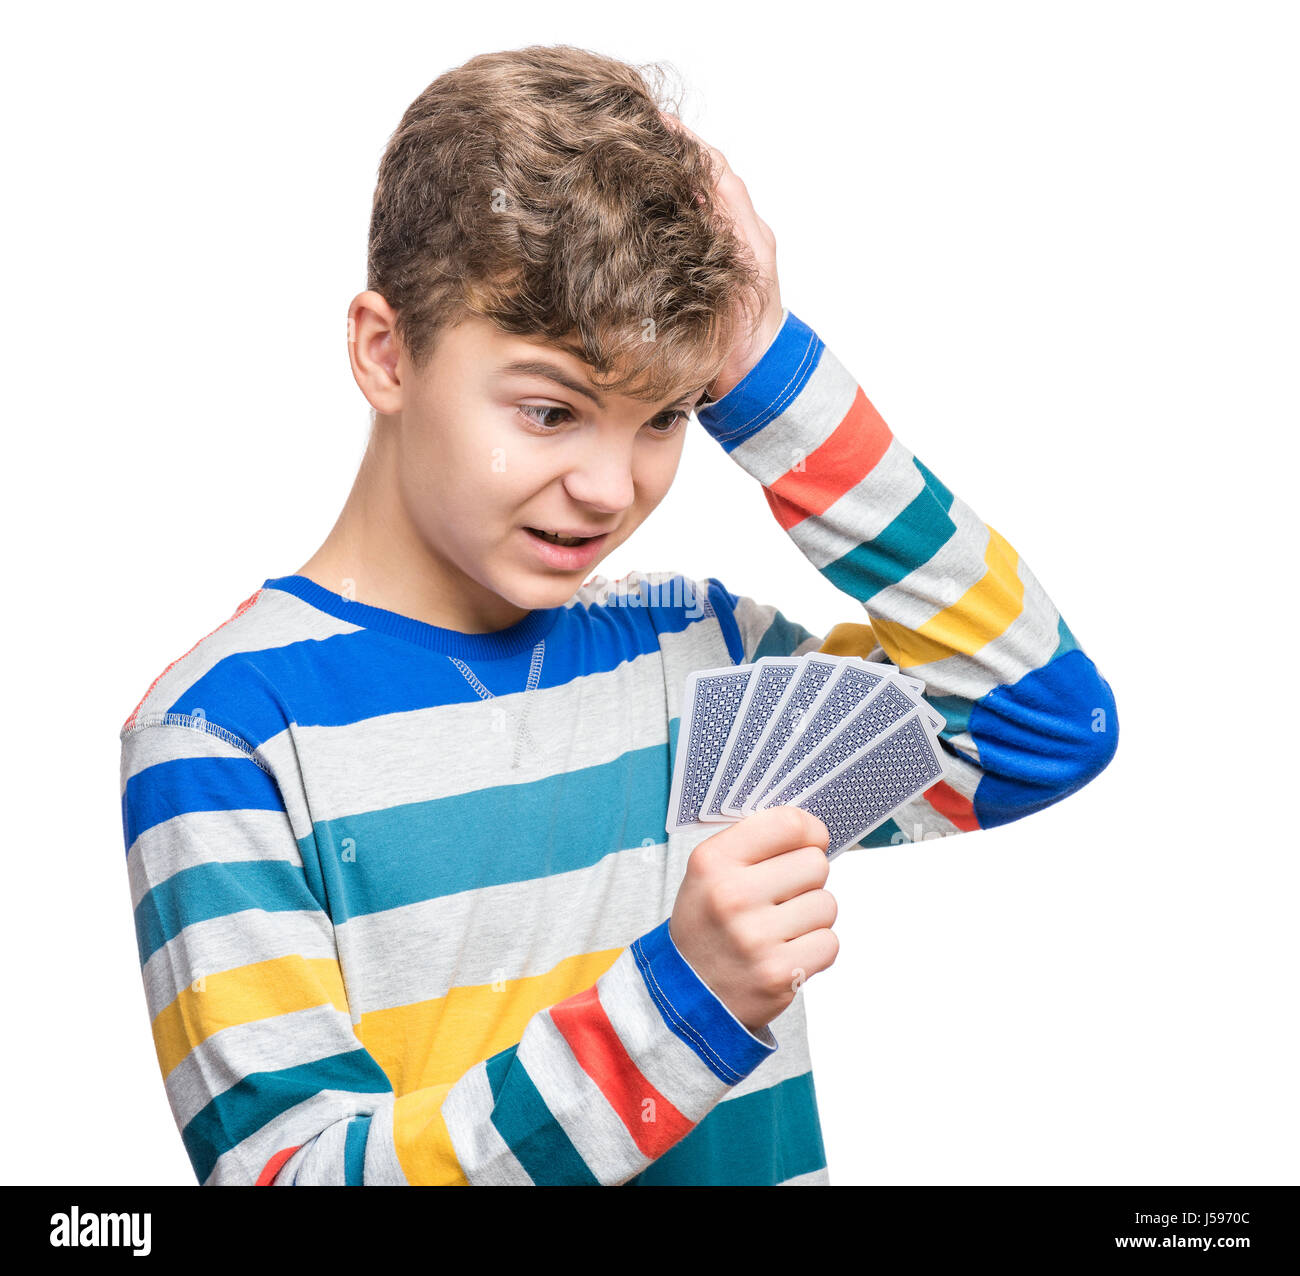 Teen boy with gamble cards Stock Photo